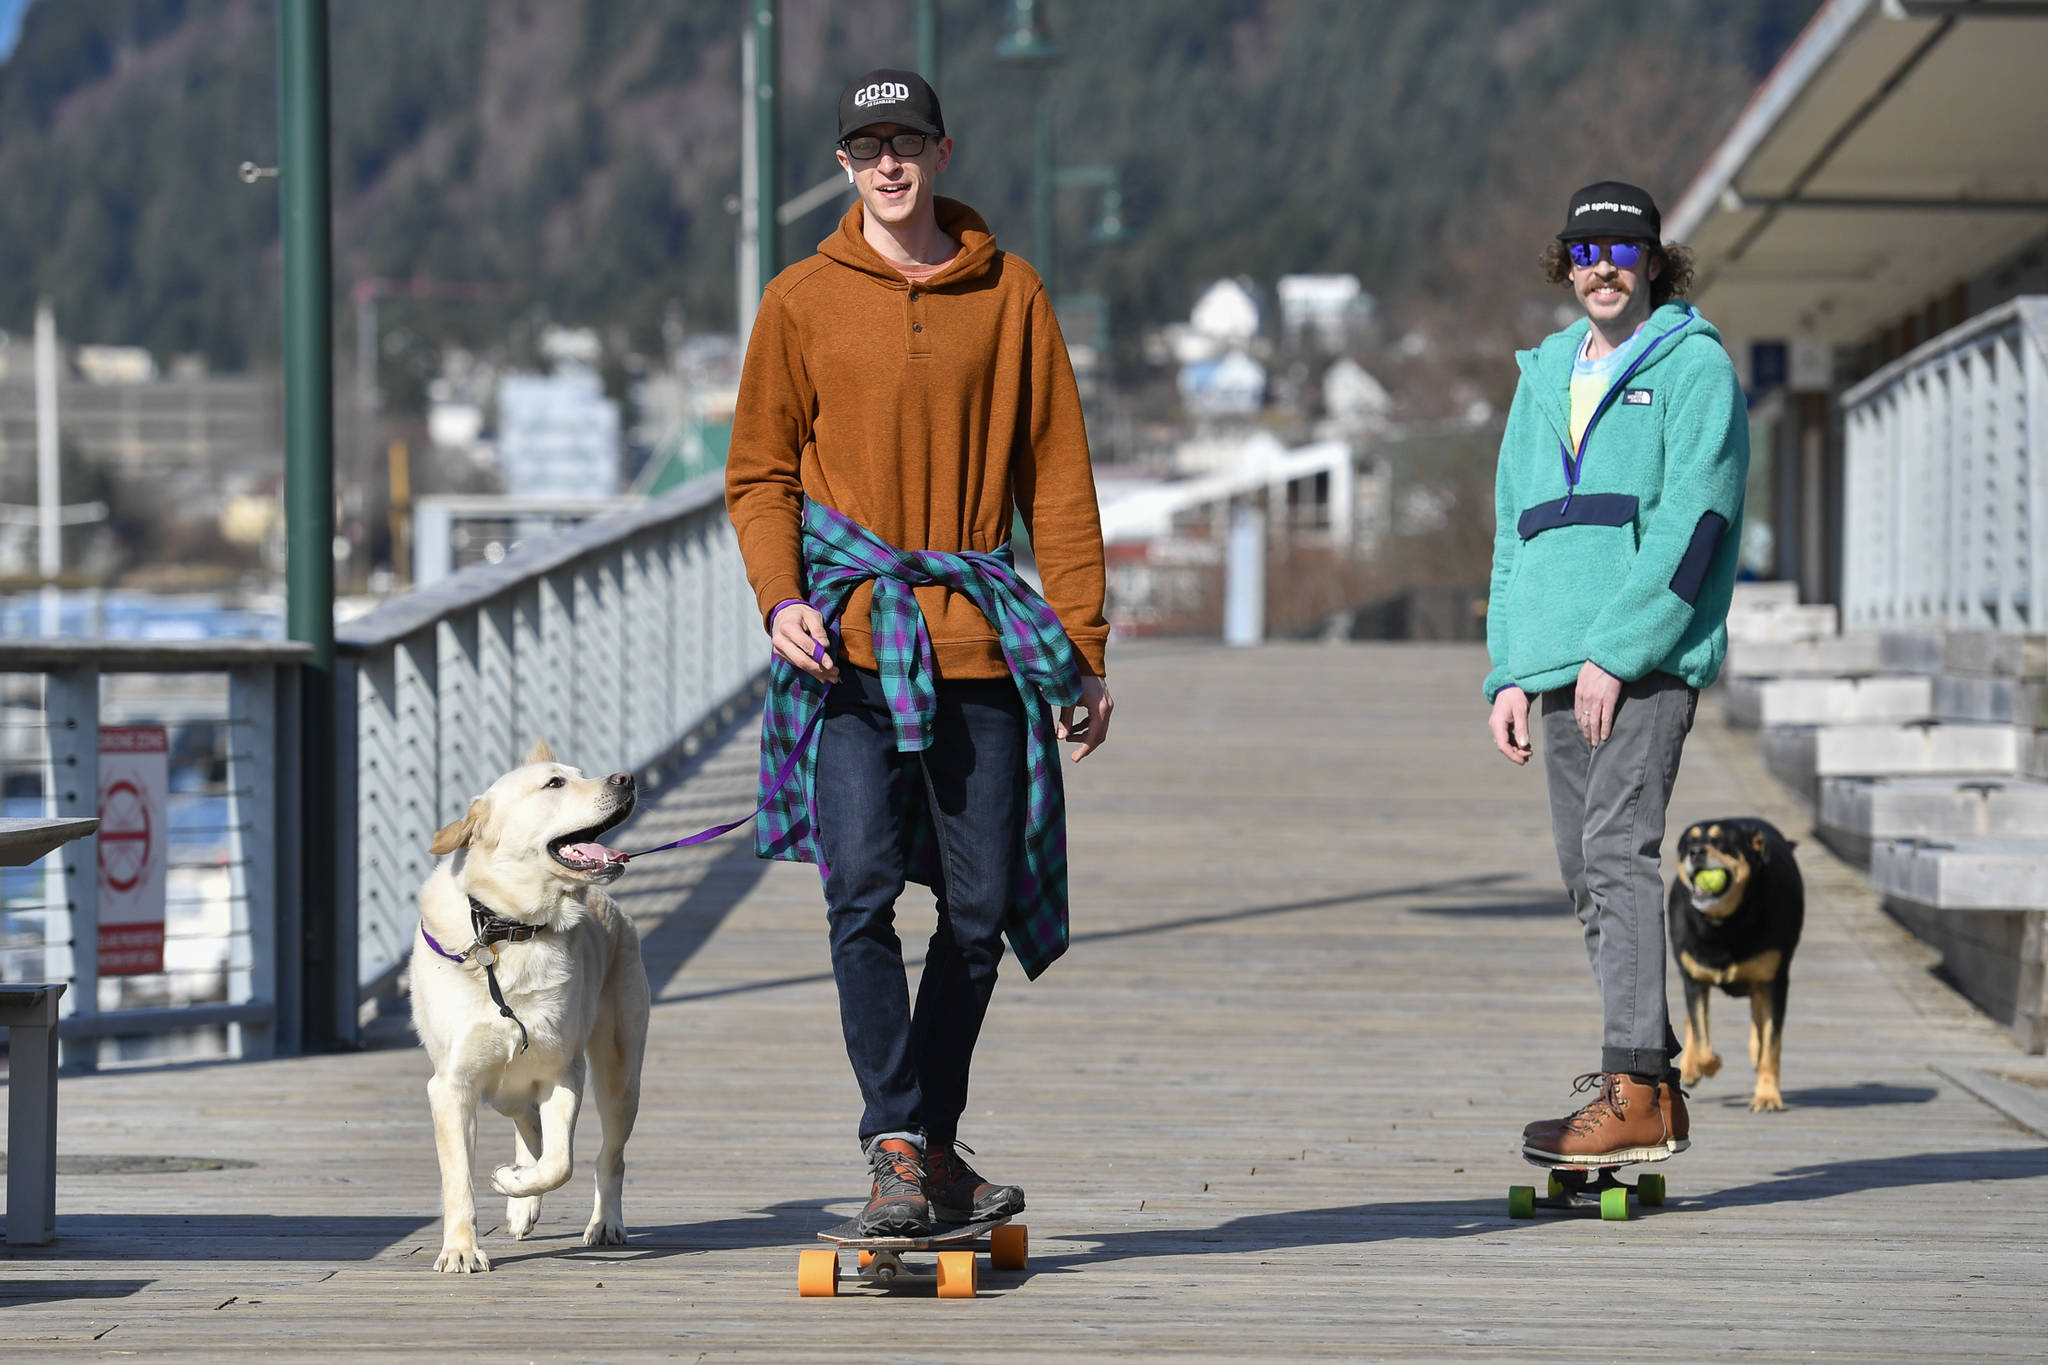 Cody Kopkie, left, with Olly, and Ray Huebschen, followed by Nala, take advantage of the sunny weather and lack of ice to skateboard along the Seawalk on Monday, March 25, 2019. (Michael Penn | Juneau Empire)